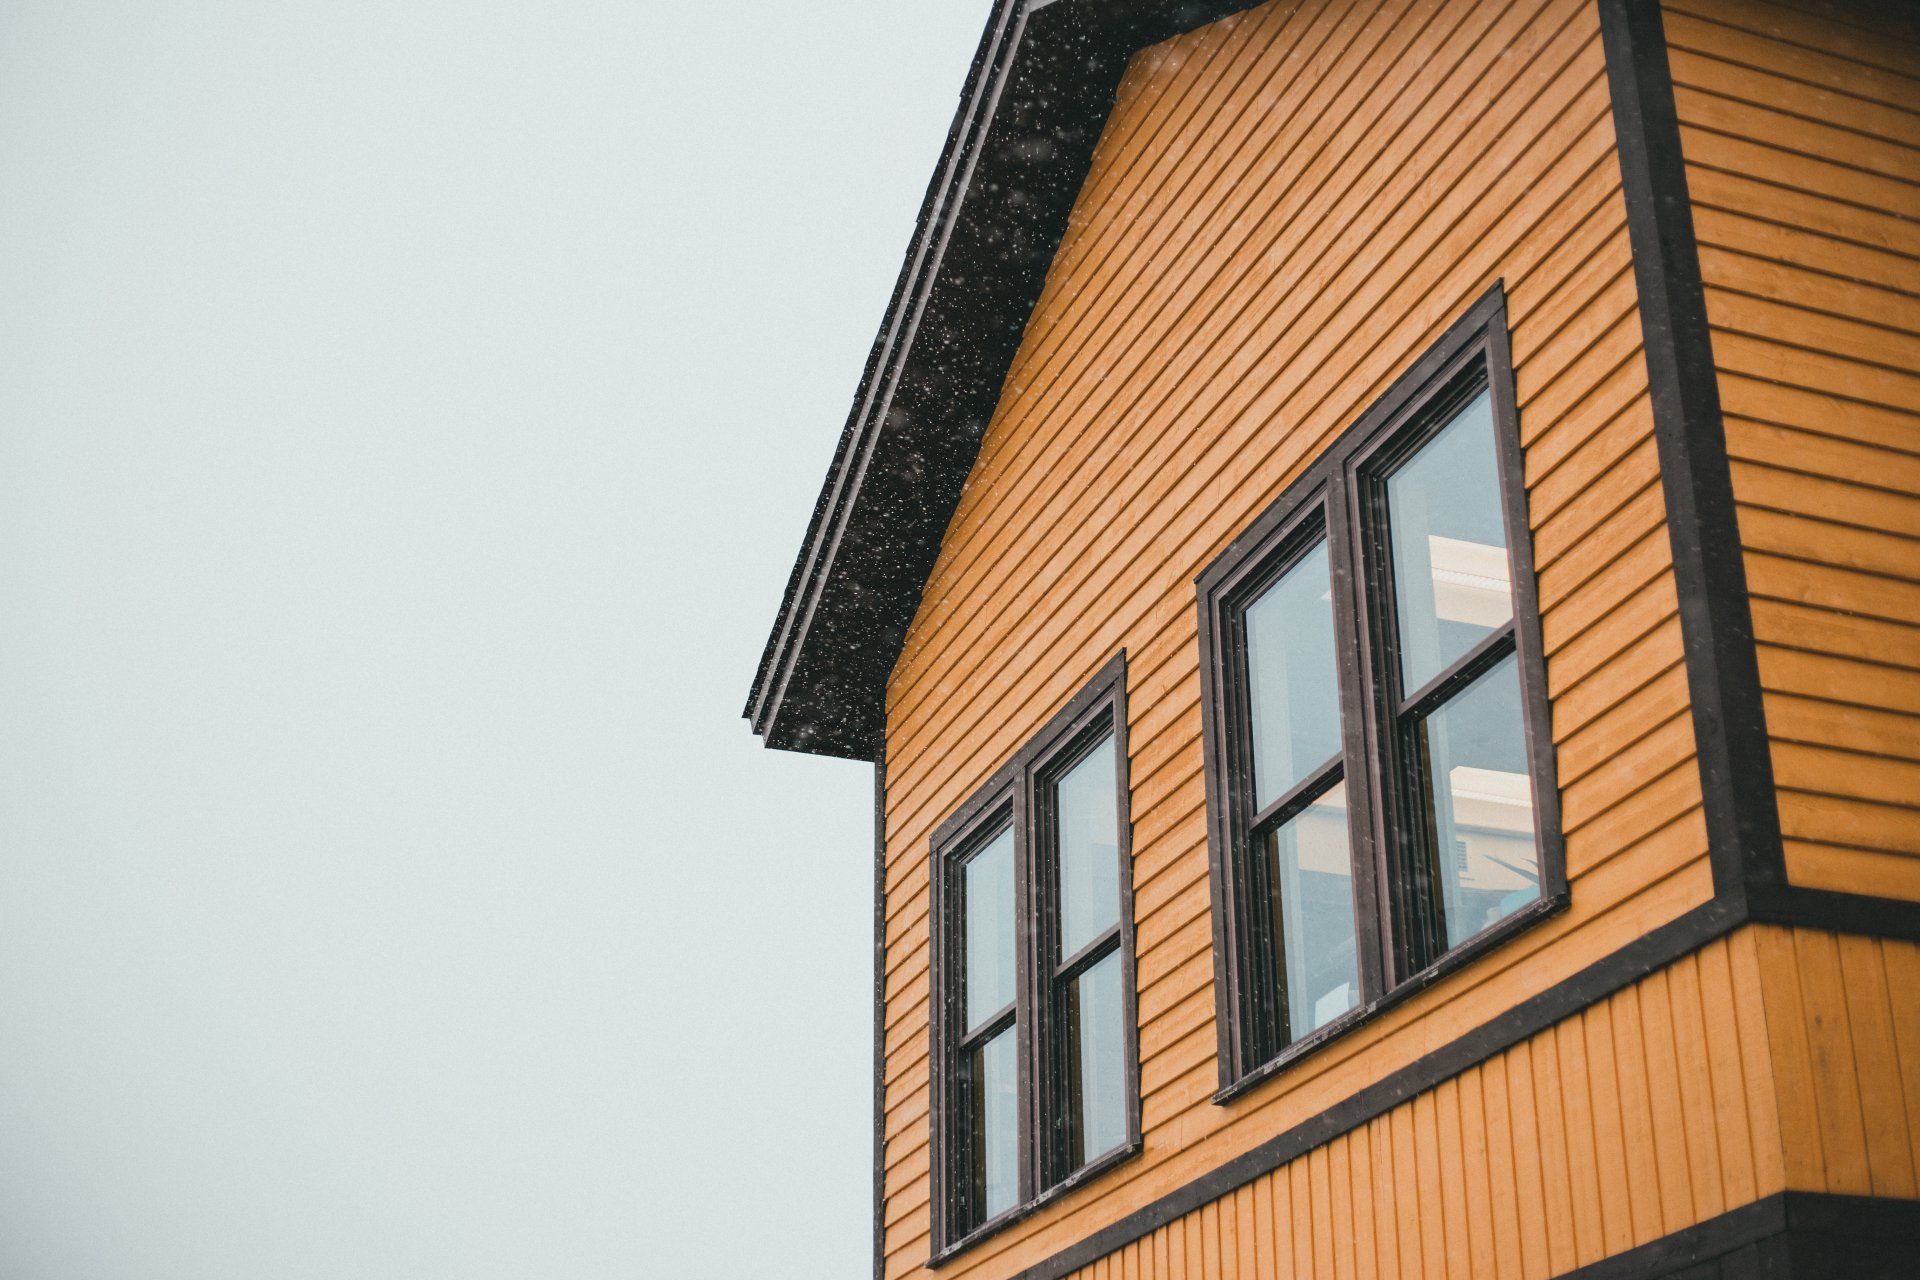 Mustard yellow siding adds a vibrant pop of color to the exterior of a building, complemented by sleek black trim.